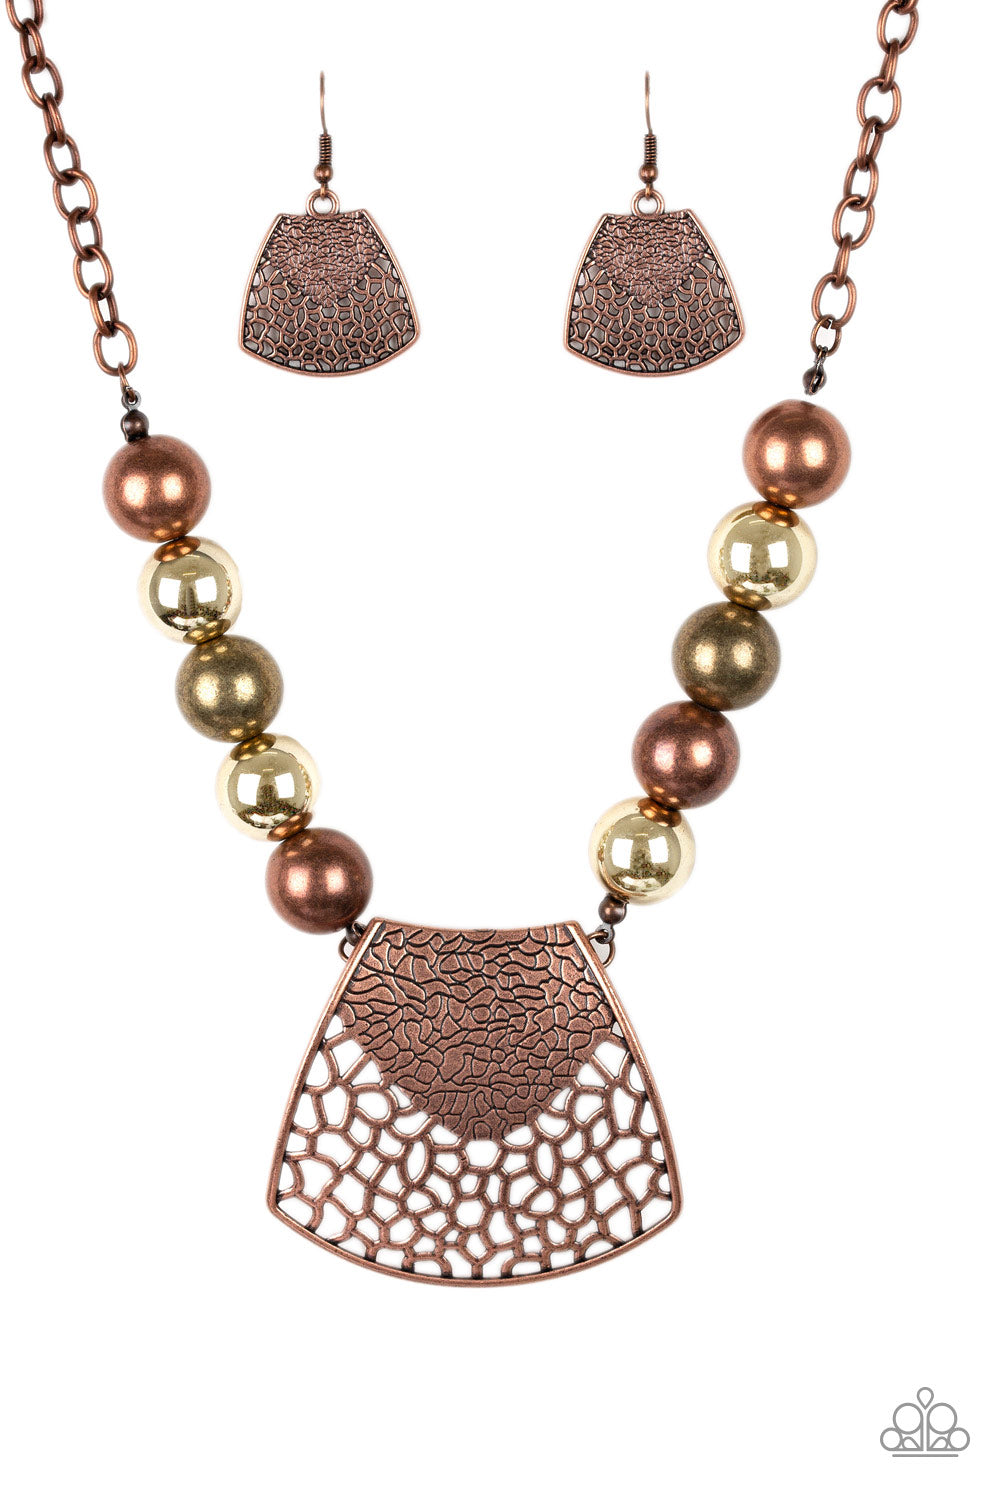 LARGE AND IN CHARGE - MULTI NECKLACE